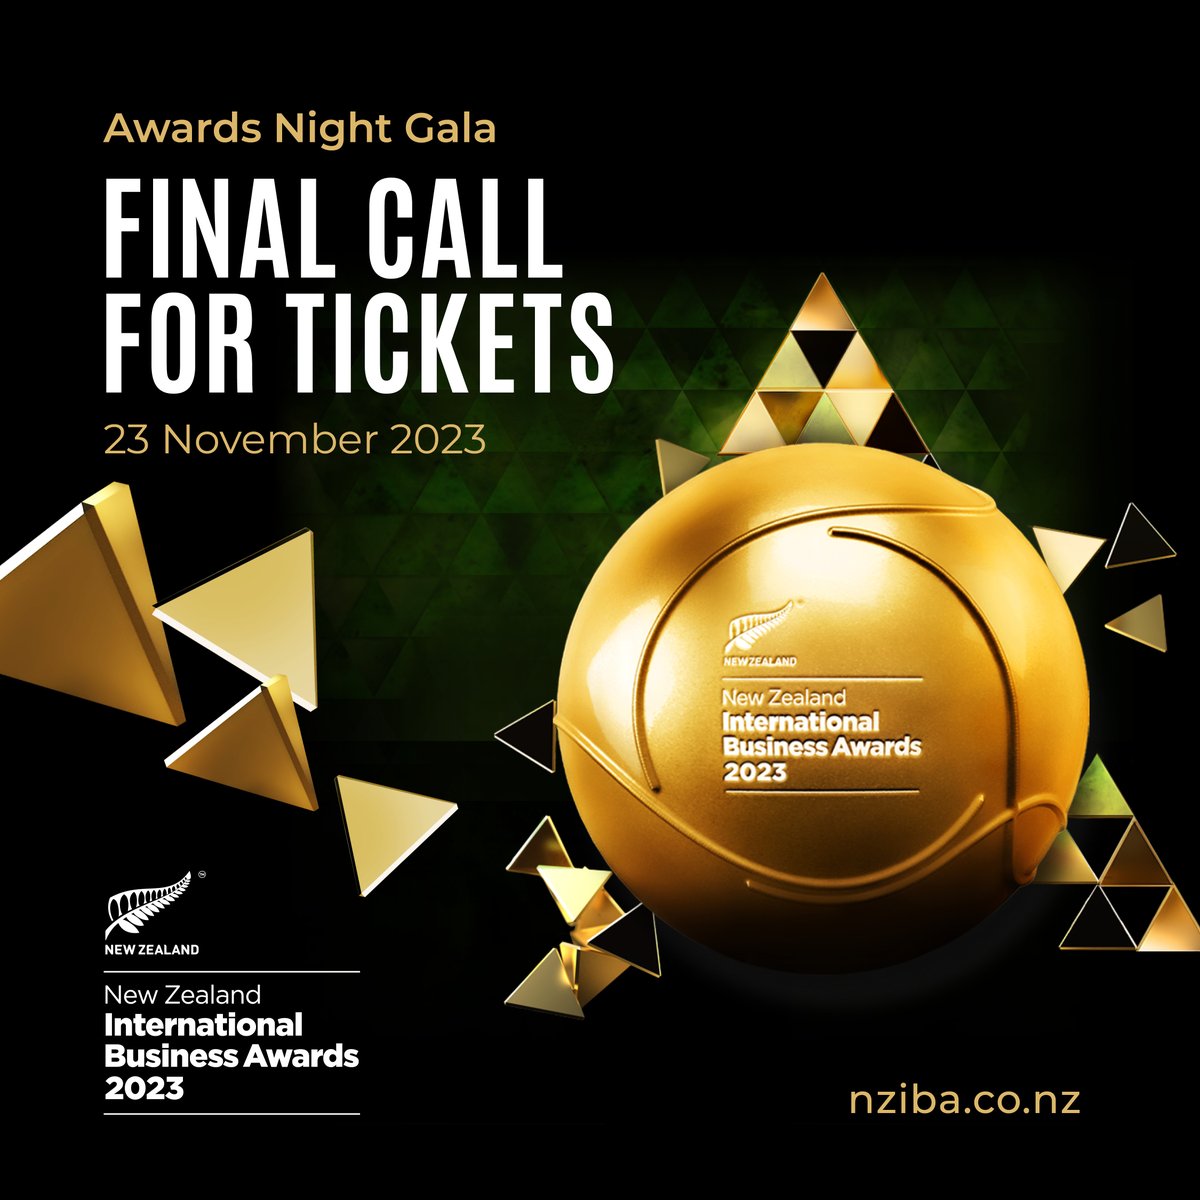 📢 Just 2 weeks to go for the 2023 #NZIBA Awards Night Gala, Thursday 23 November, Viaduct Events Centre, Auckland - this is the final call for tickets: bit.ly/3rezw4g Don't miss this opportunity to join NZ exporters to celebrate their successes in the past year!